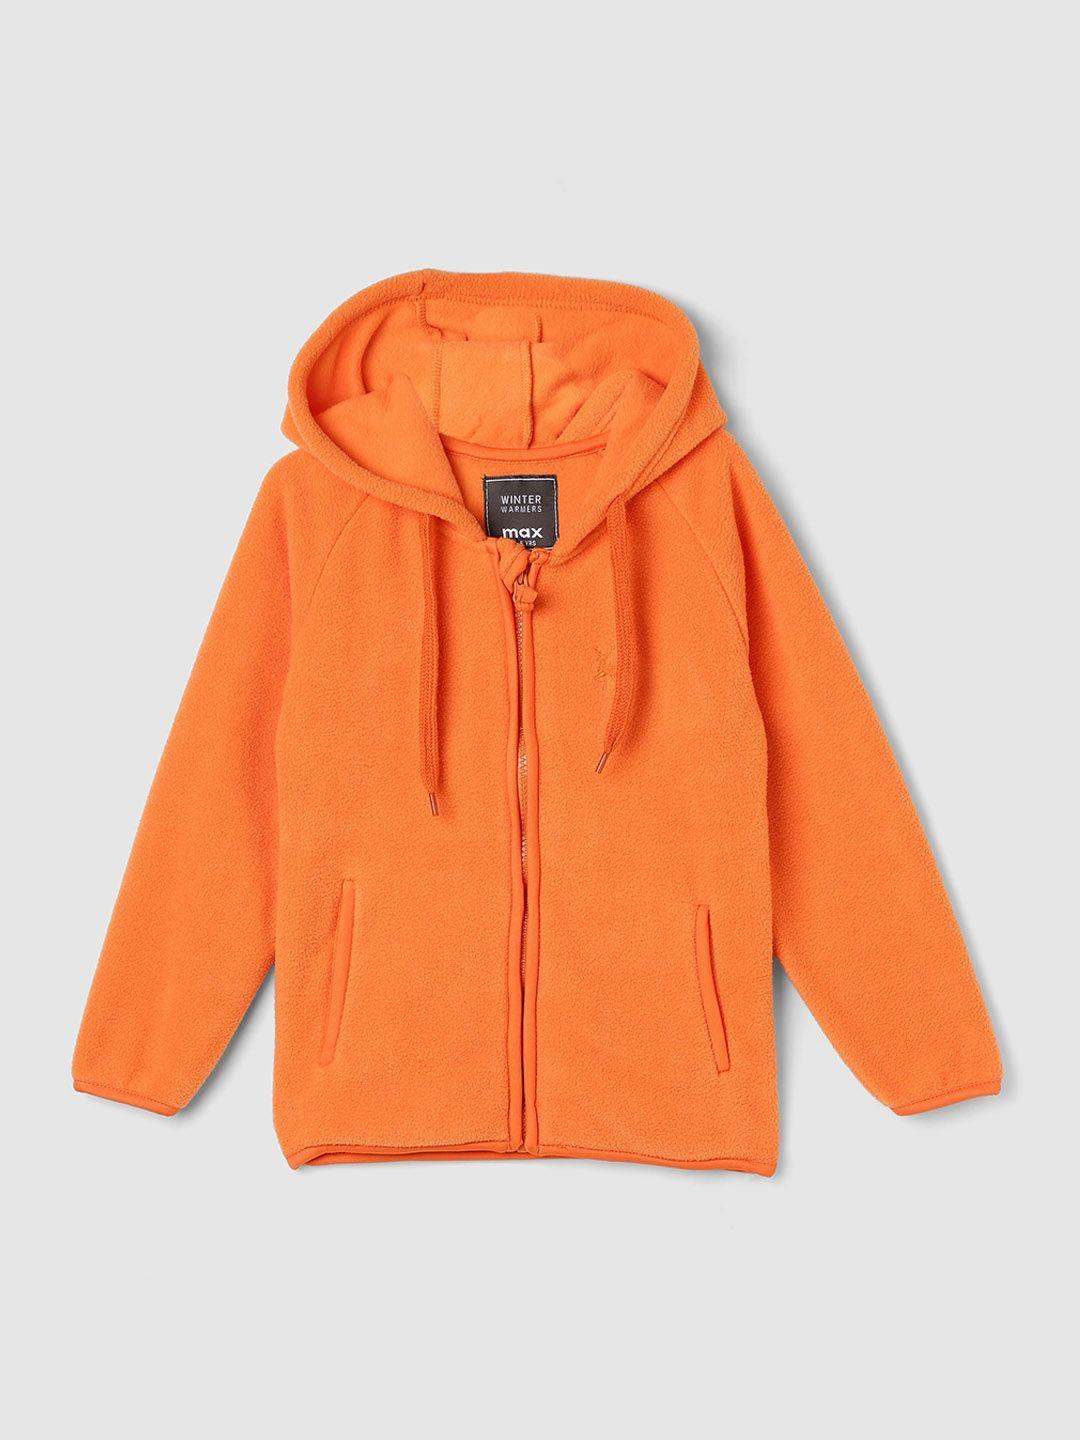 max boys hooded tailored jacket